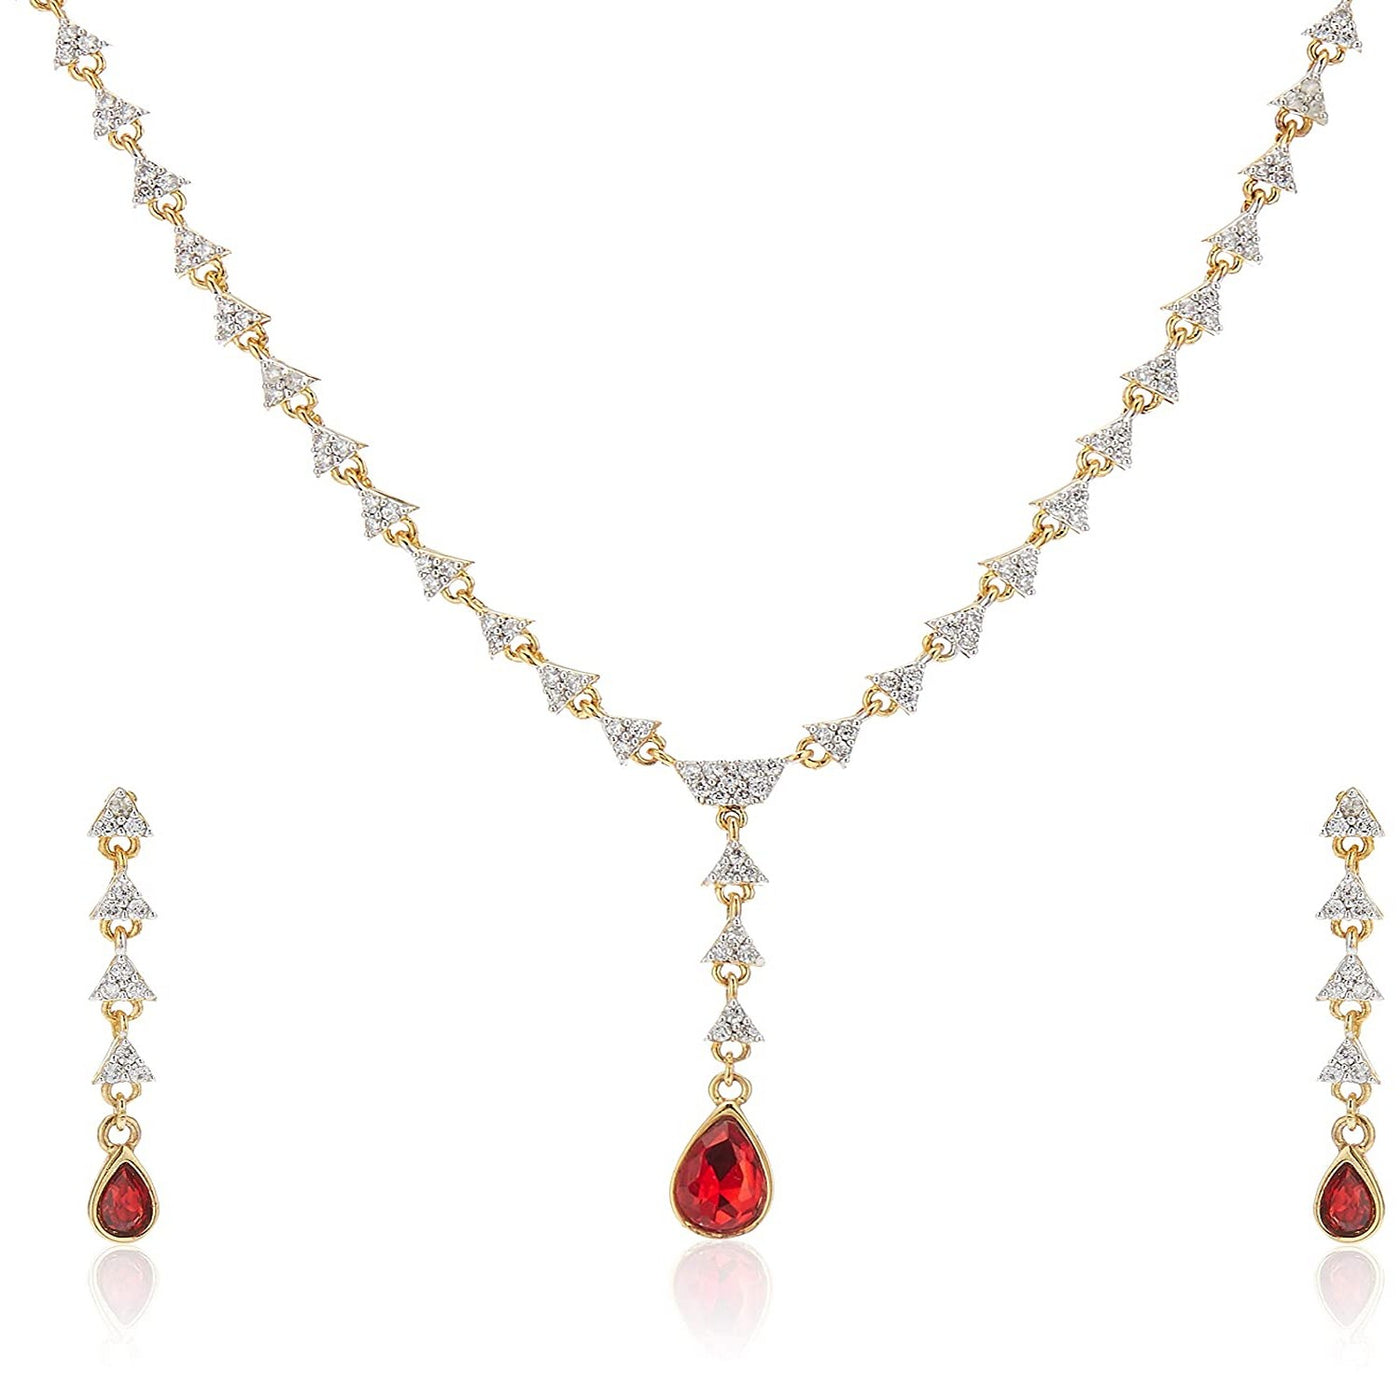 Estele - 24 KT Gold plated Necklace Set with Austrian Crystals and Red Stones for Women